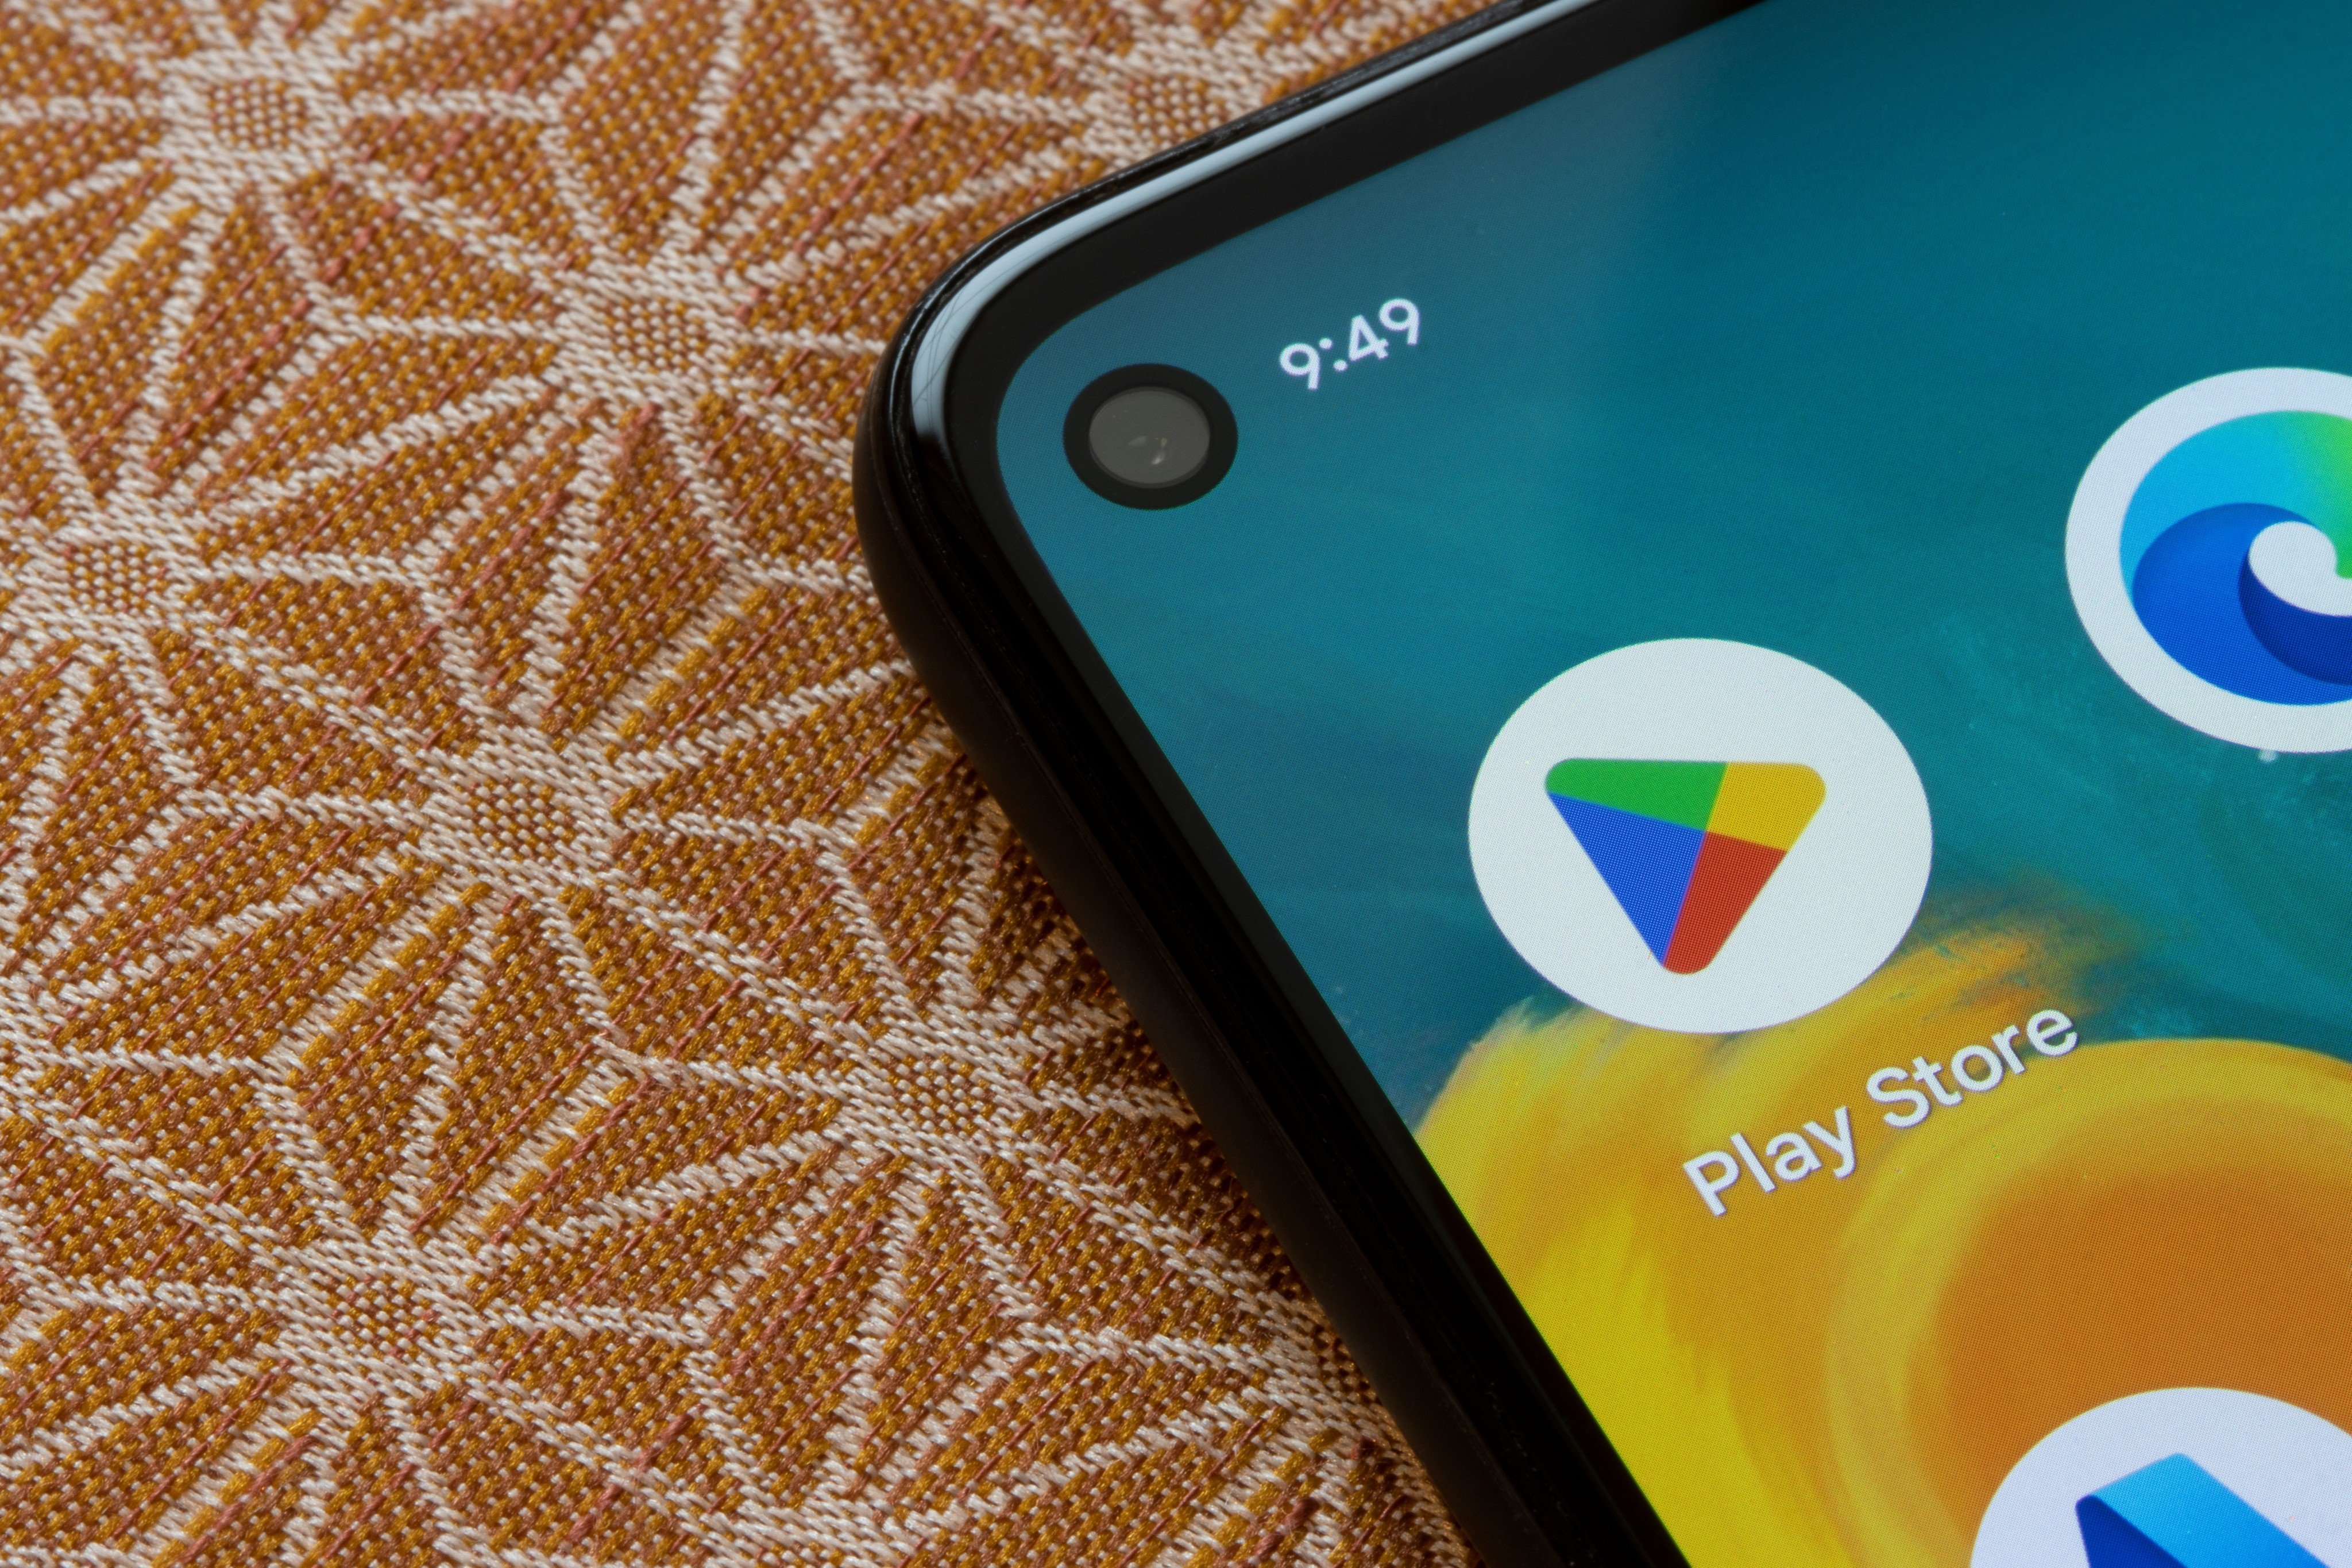 Google said the two Chinese developers it sued had uploaded 87 bogus apps on the company’s Play Store to target users in the US and Canada. Photo: Shutterstock